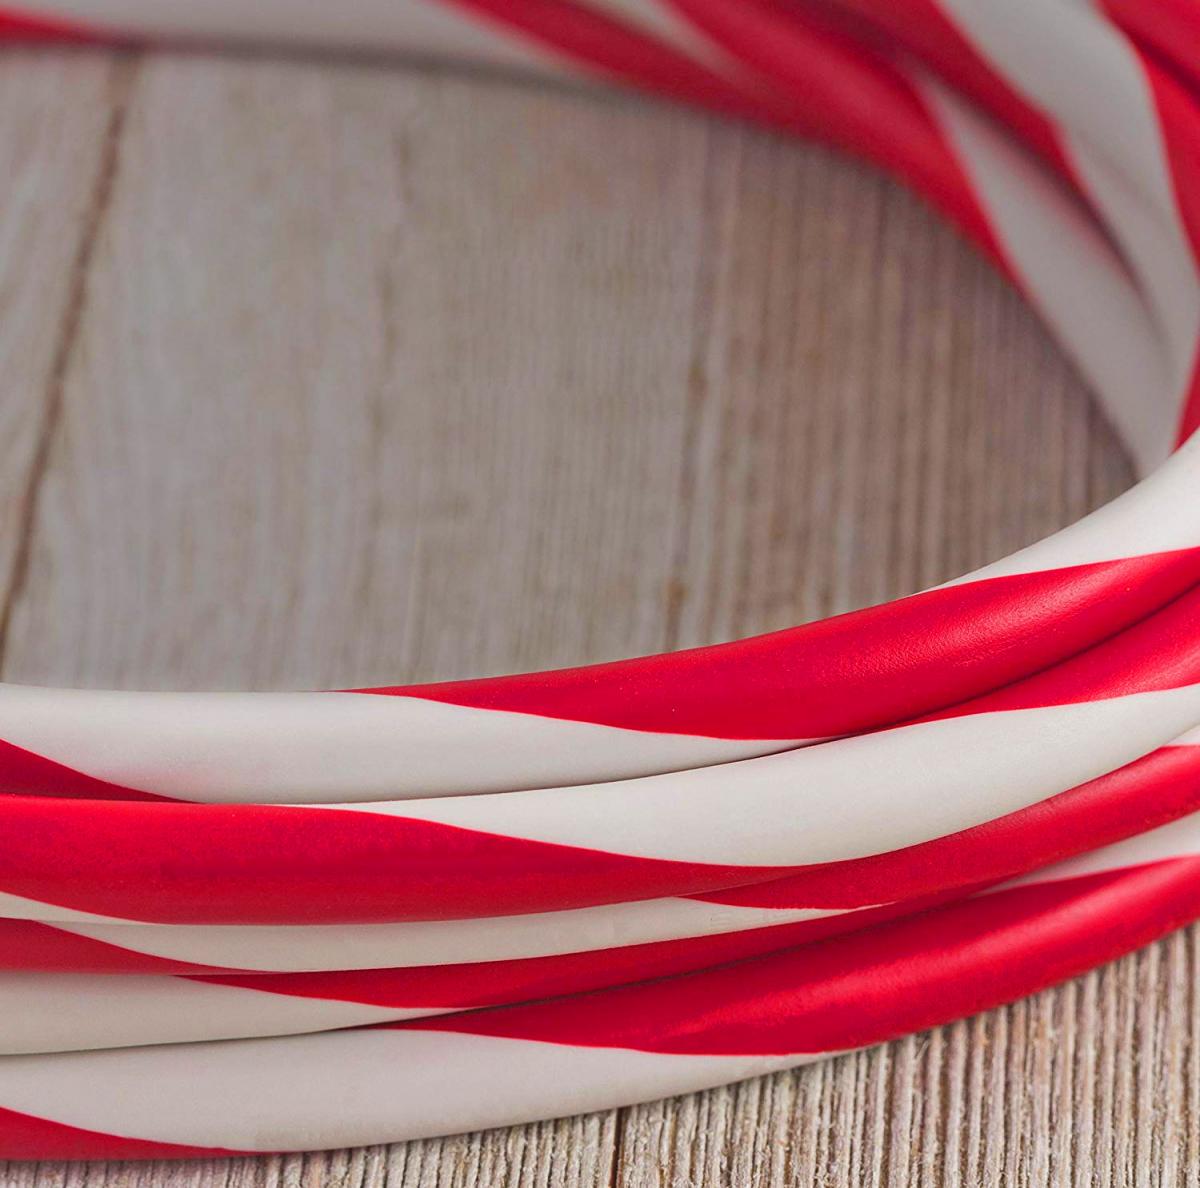 Candy Cane Extension Cord - Best Christmas Extension Cord For Christmas Trees